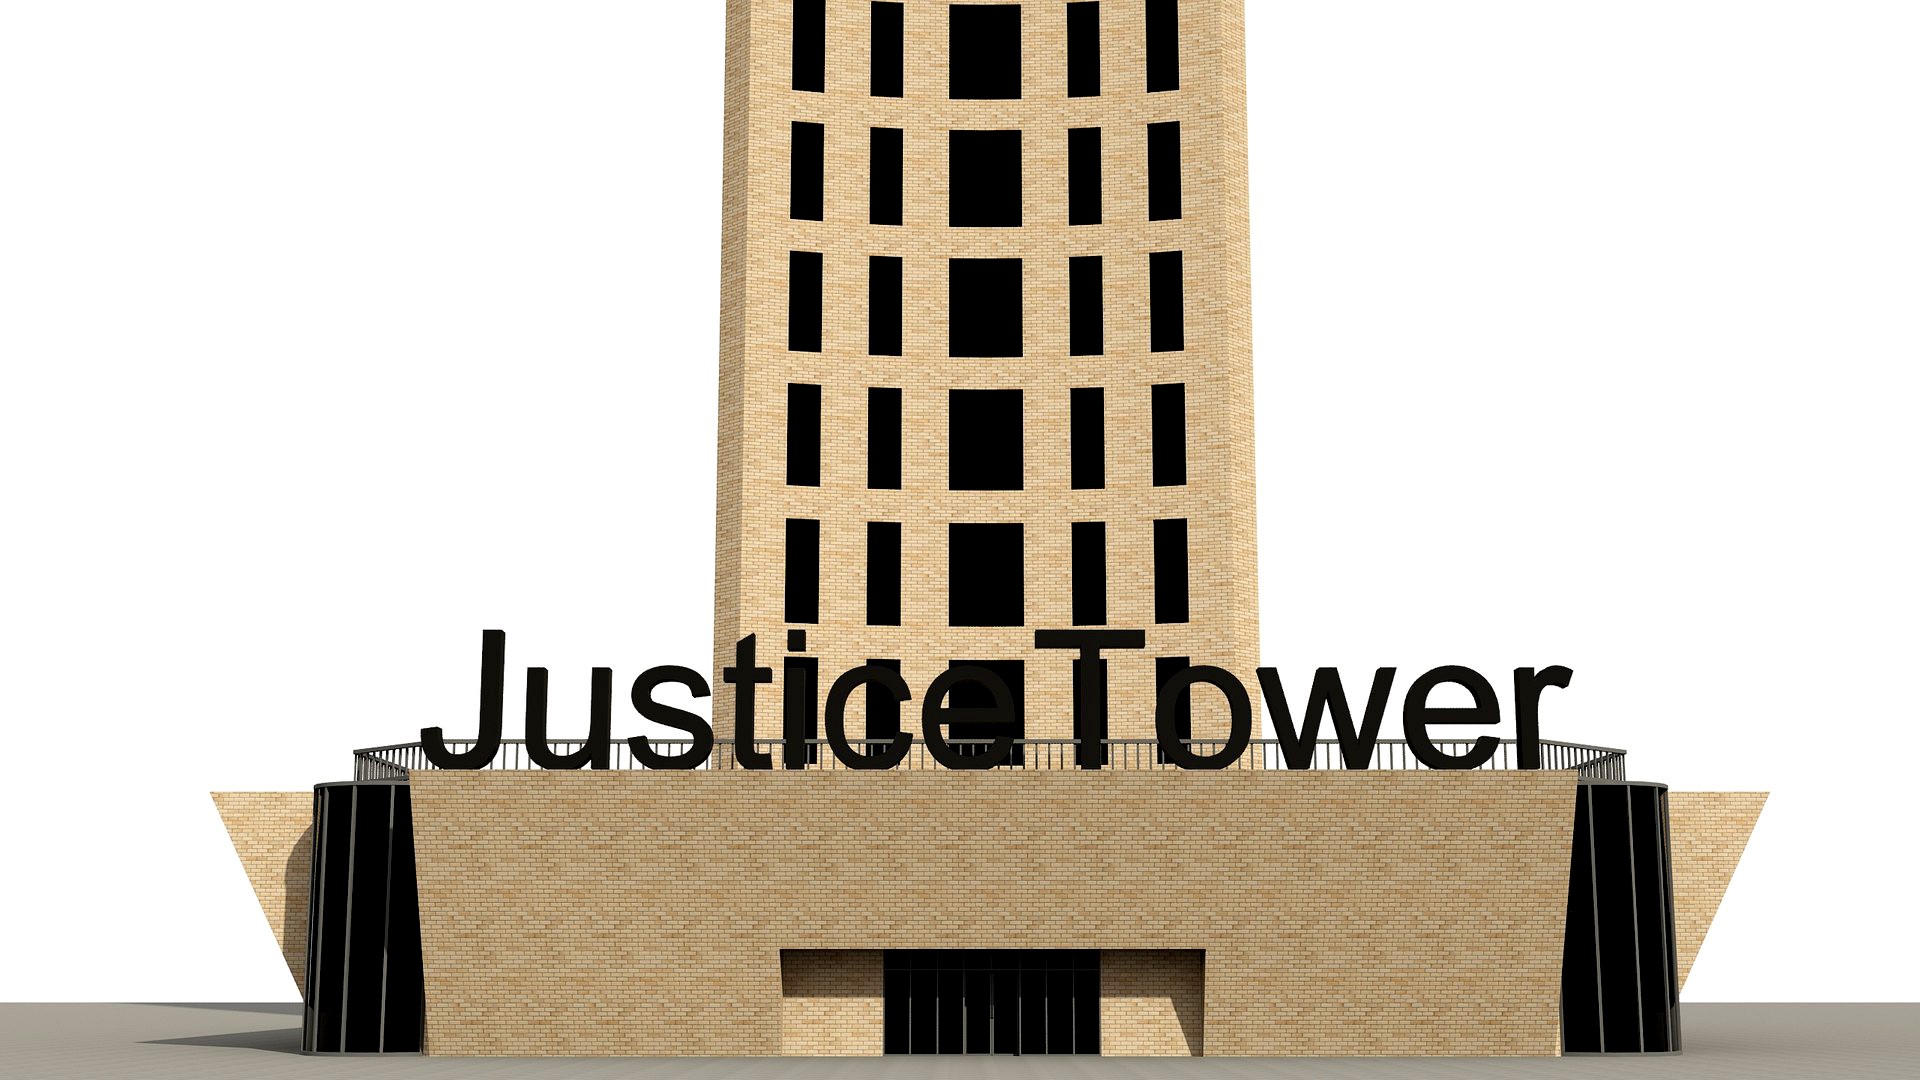 Justice Tower